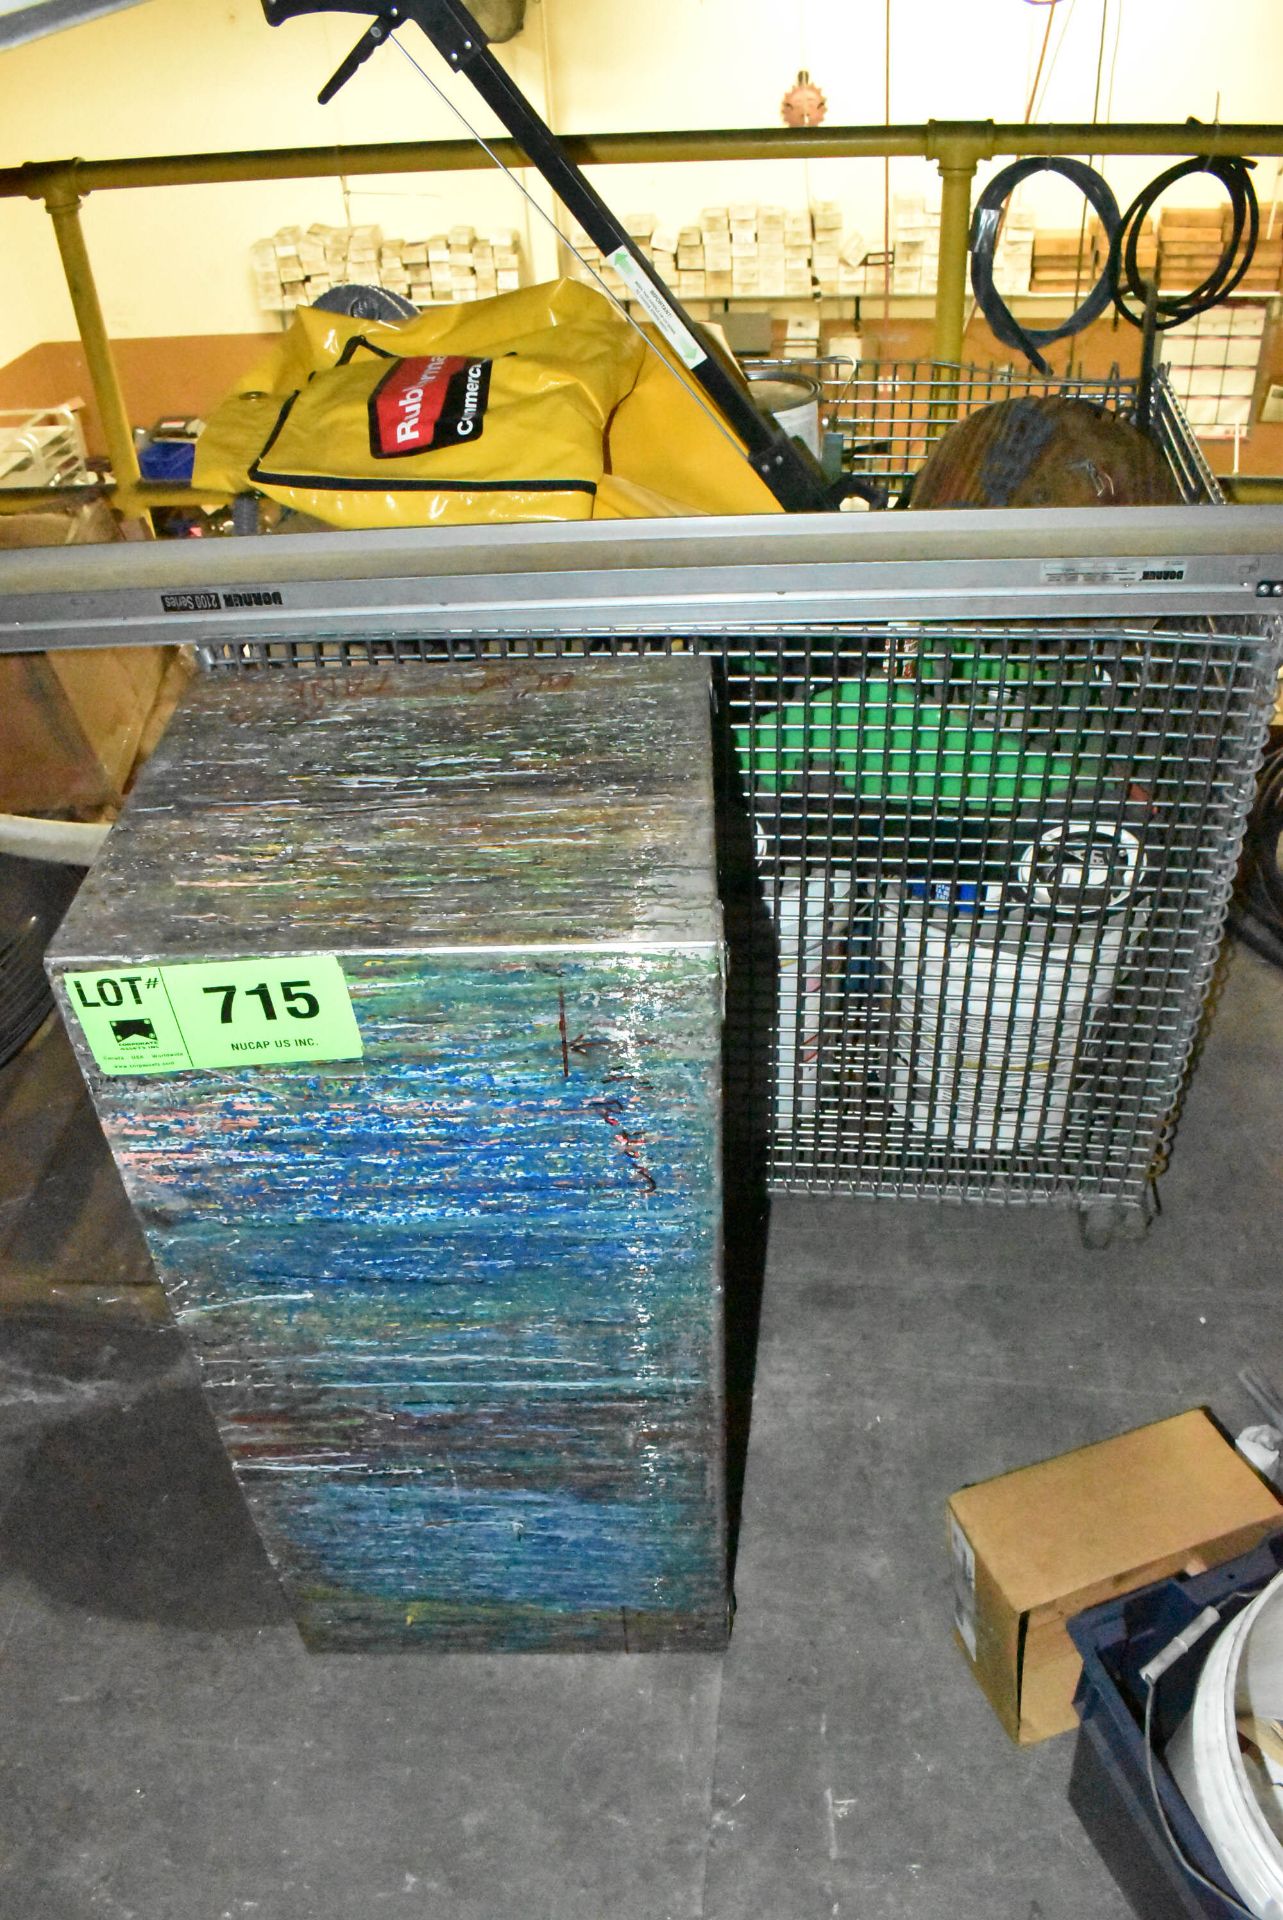 LOT/ WIRE MESH BIN WITH CONTENTS - INCLUDING SHOP BOX, ELECTRICAL CABLE, PORTABLE BELT CONVEYOR,